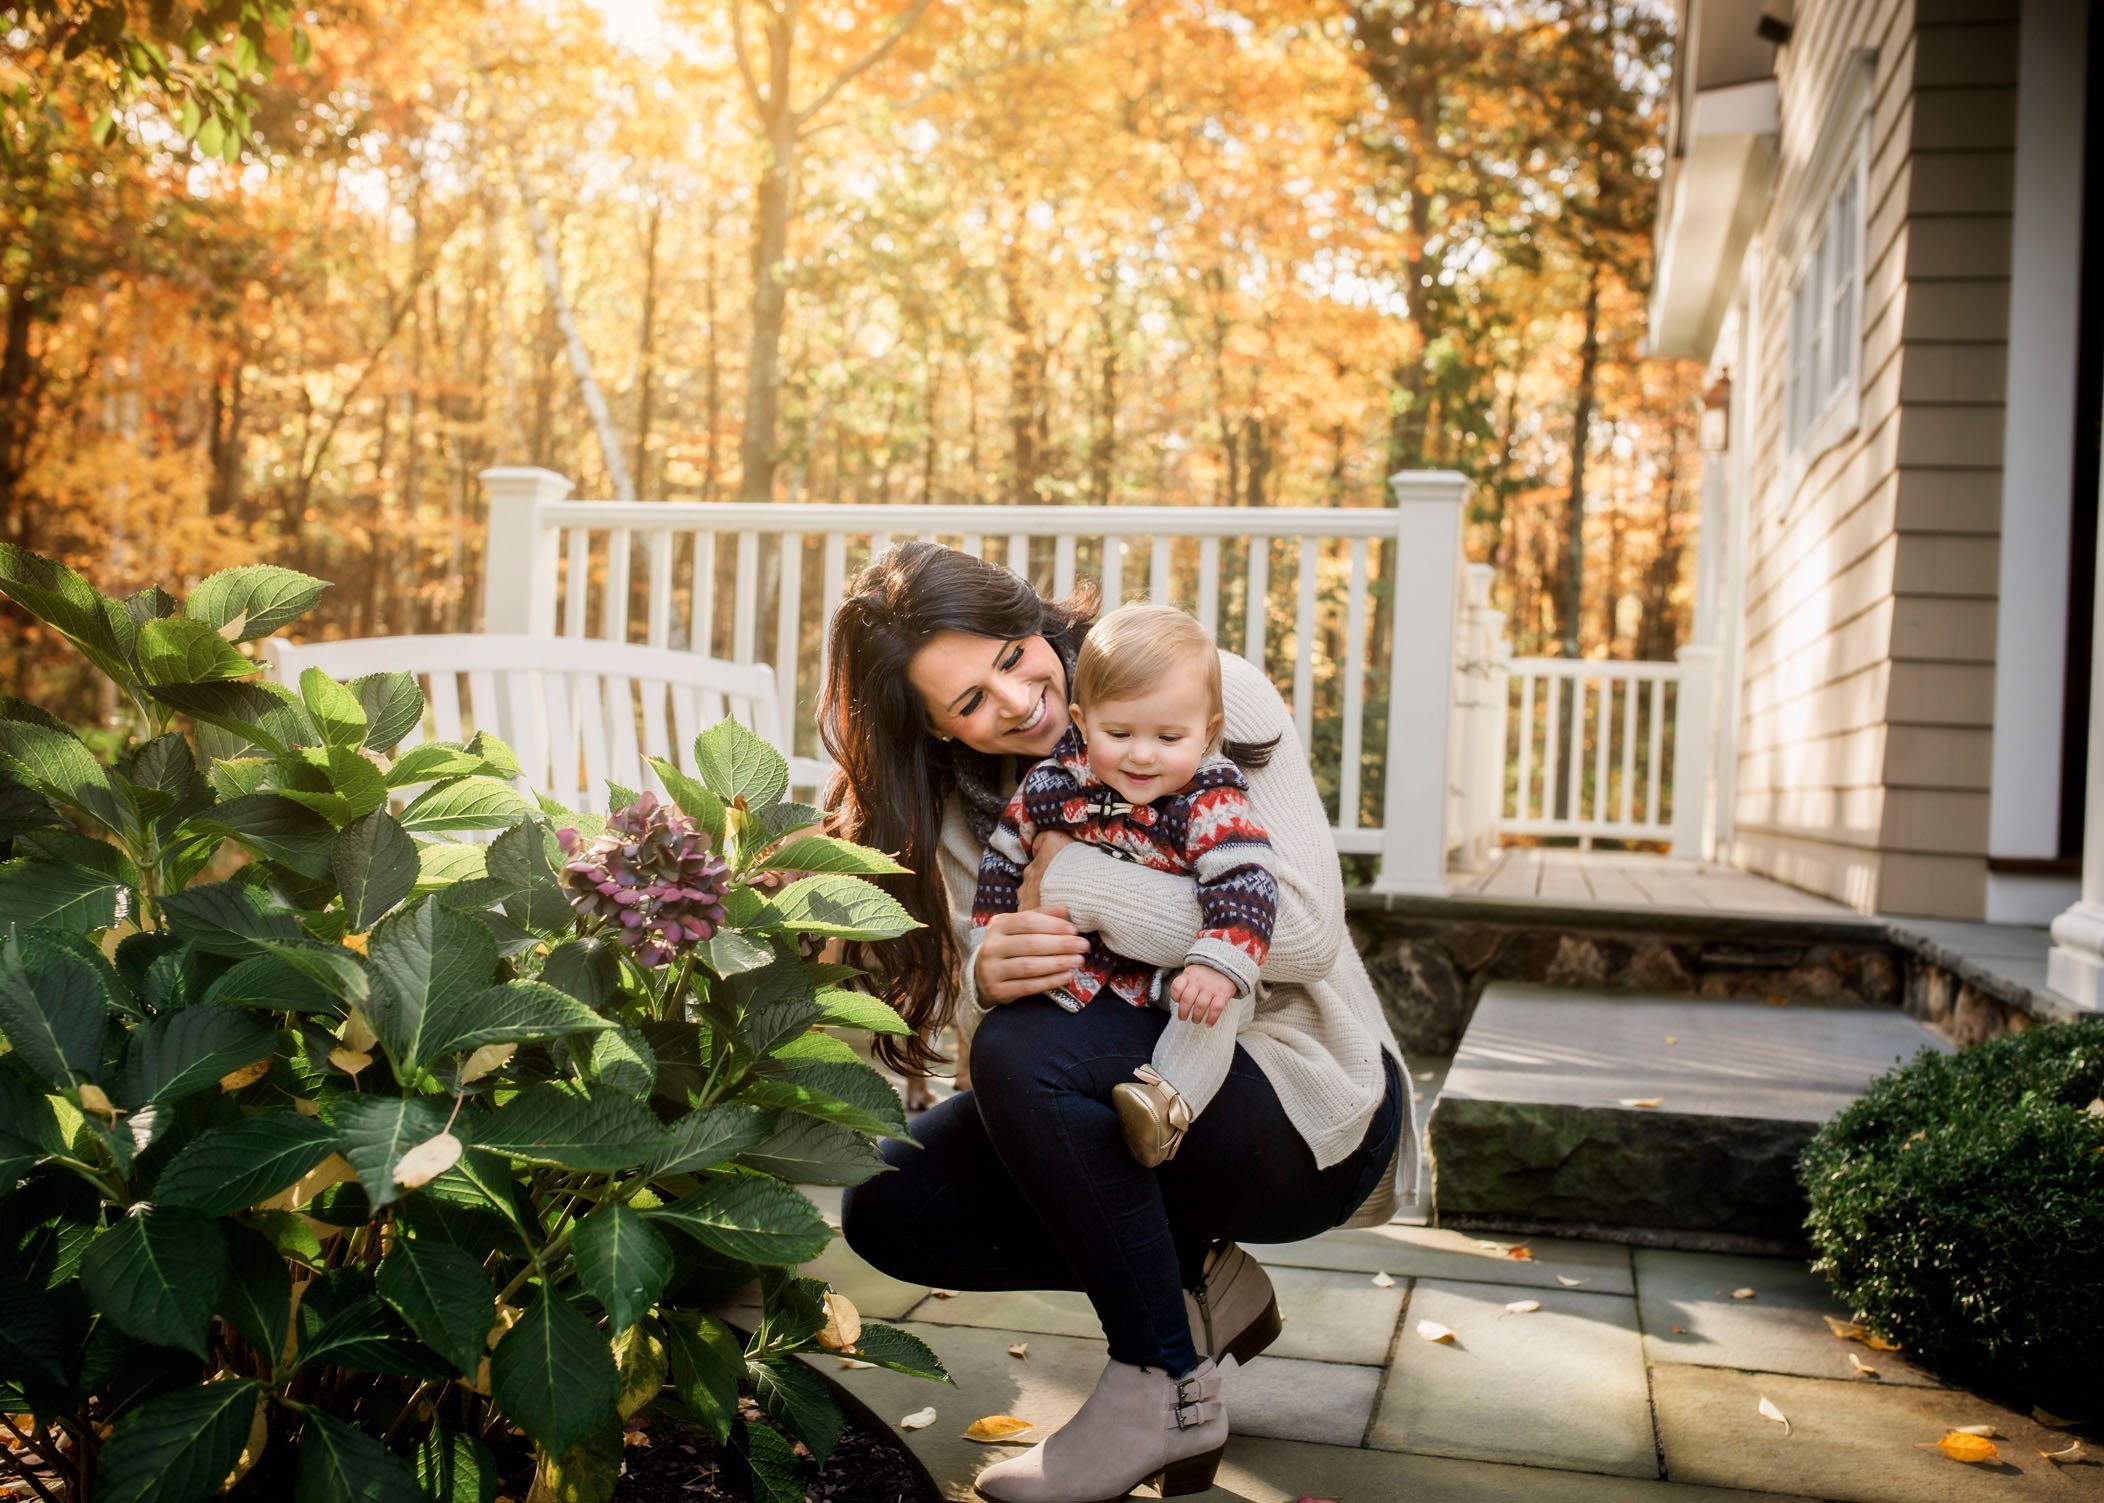 Mom and 12 month old girl looking at flowers outside in fall